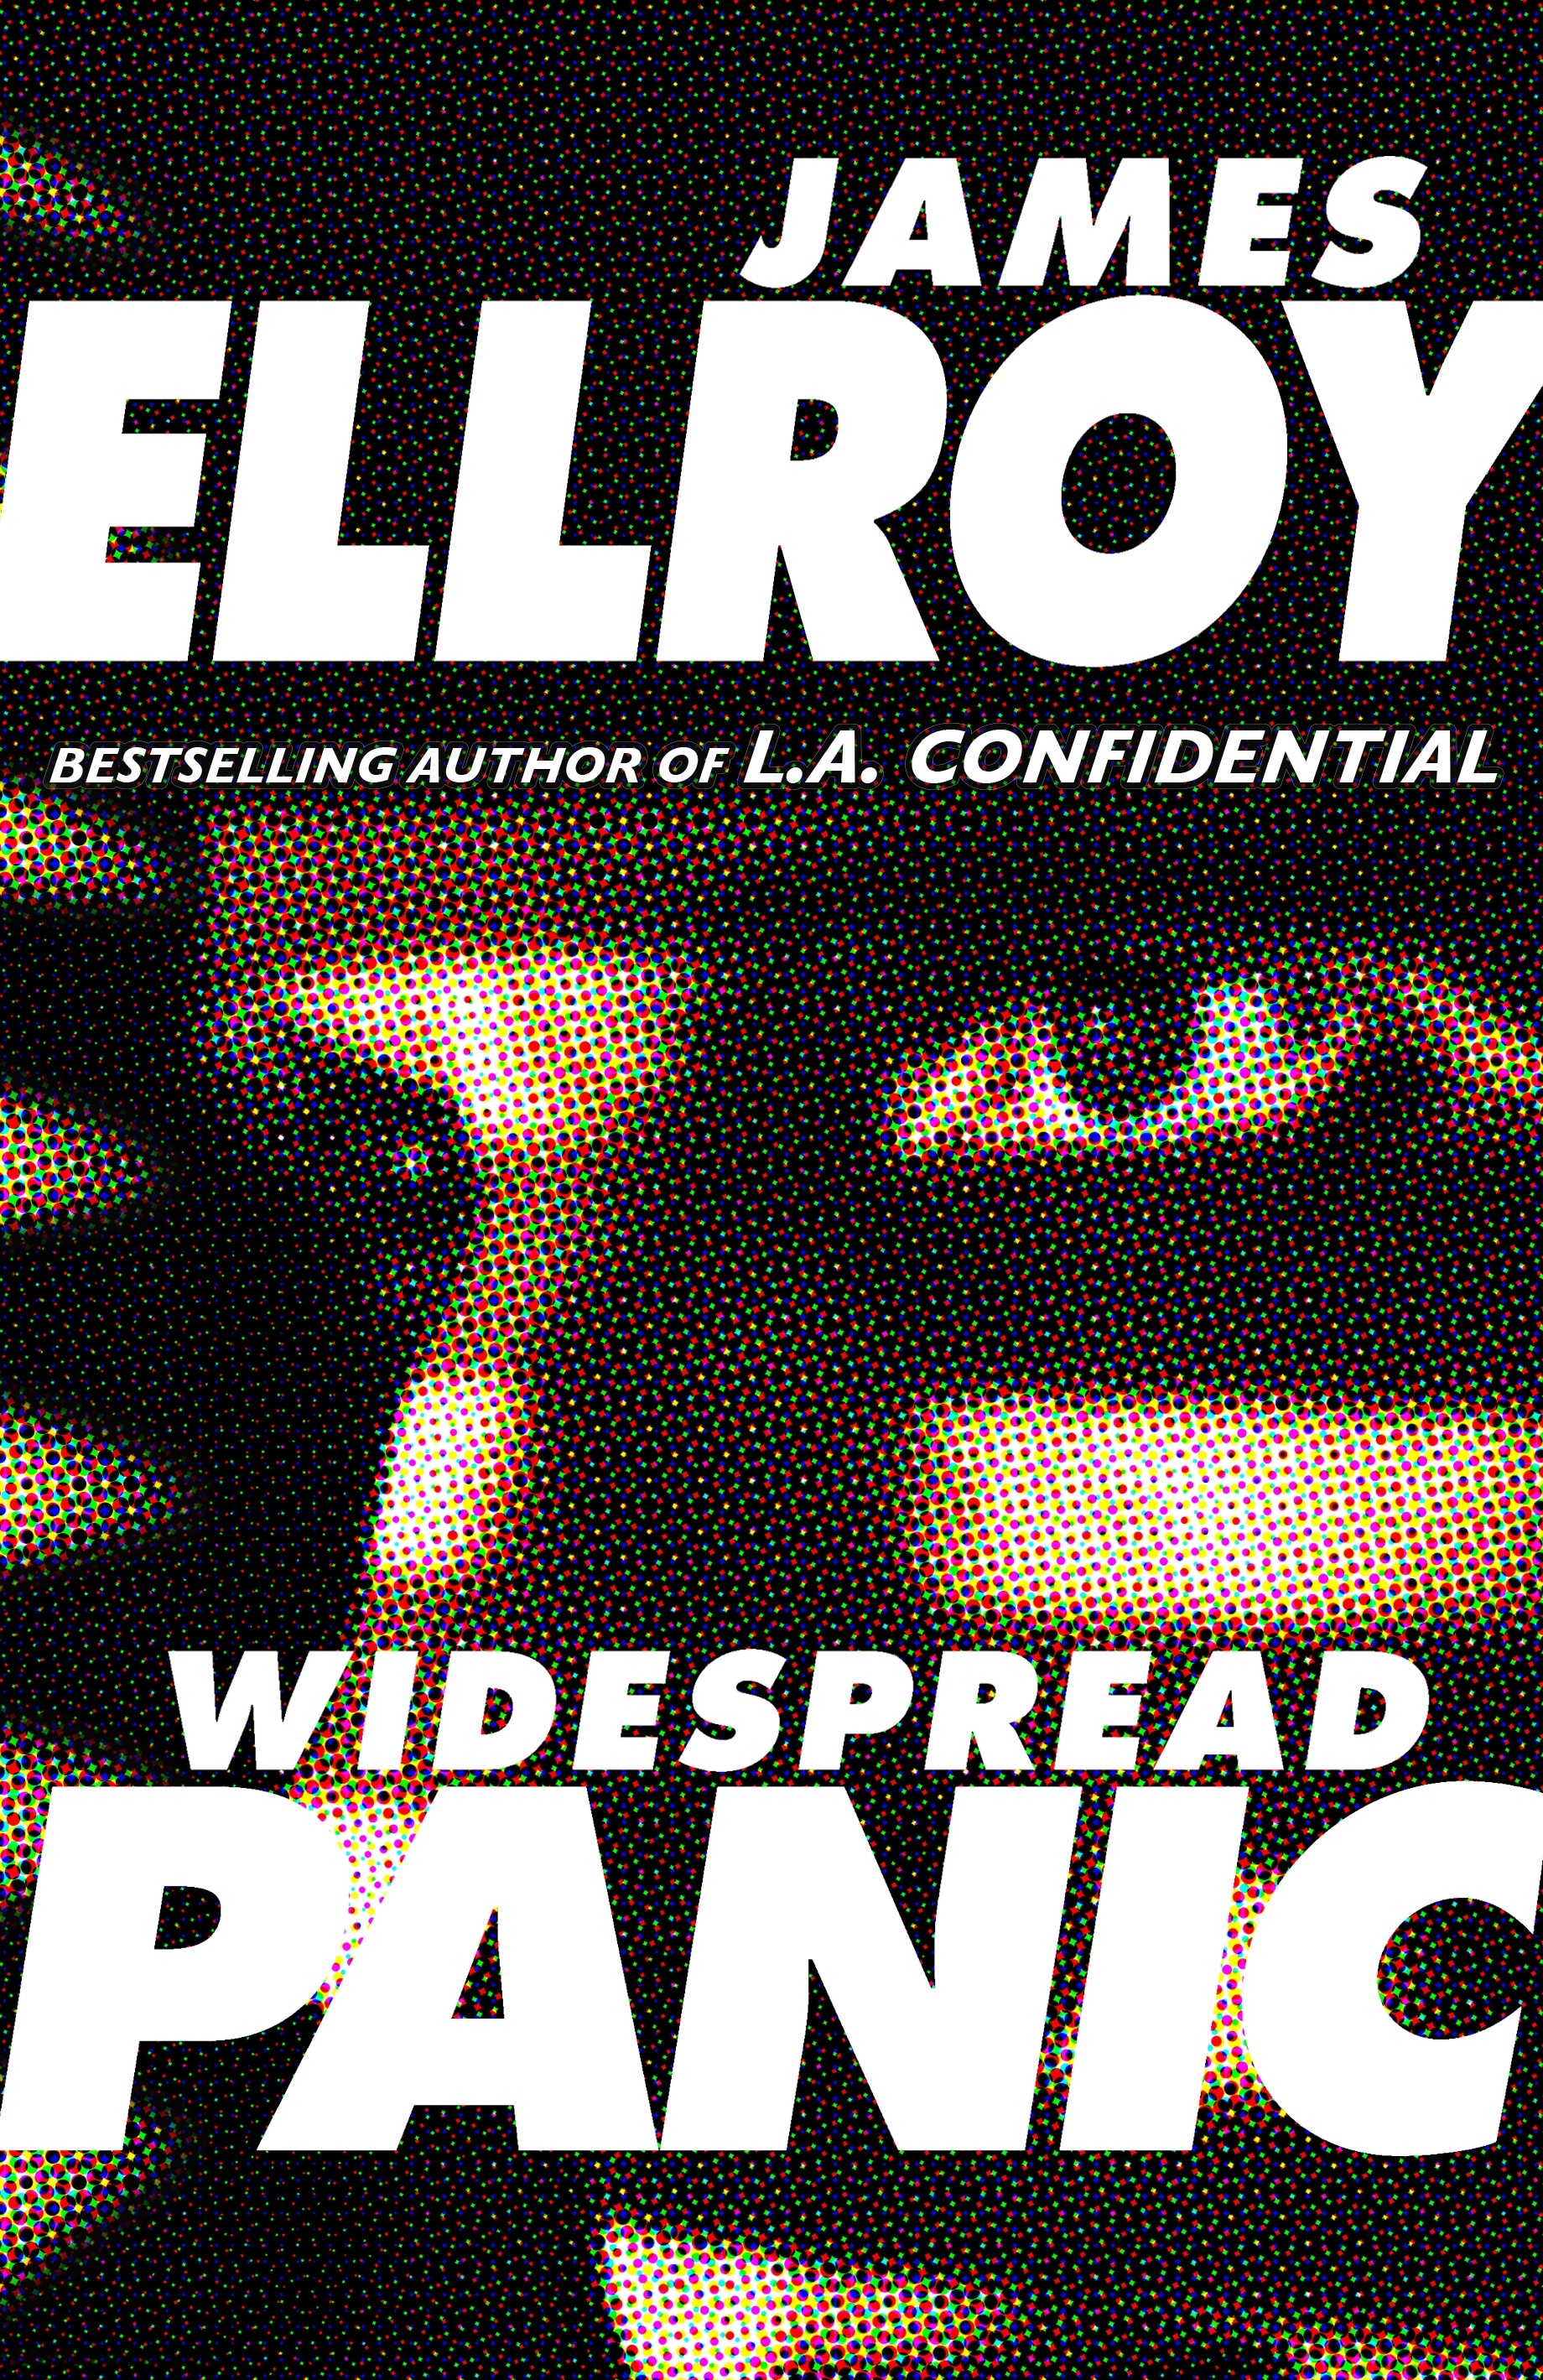 Book “Widespread Panic” by James Ellroy — July 1, 2021